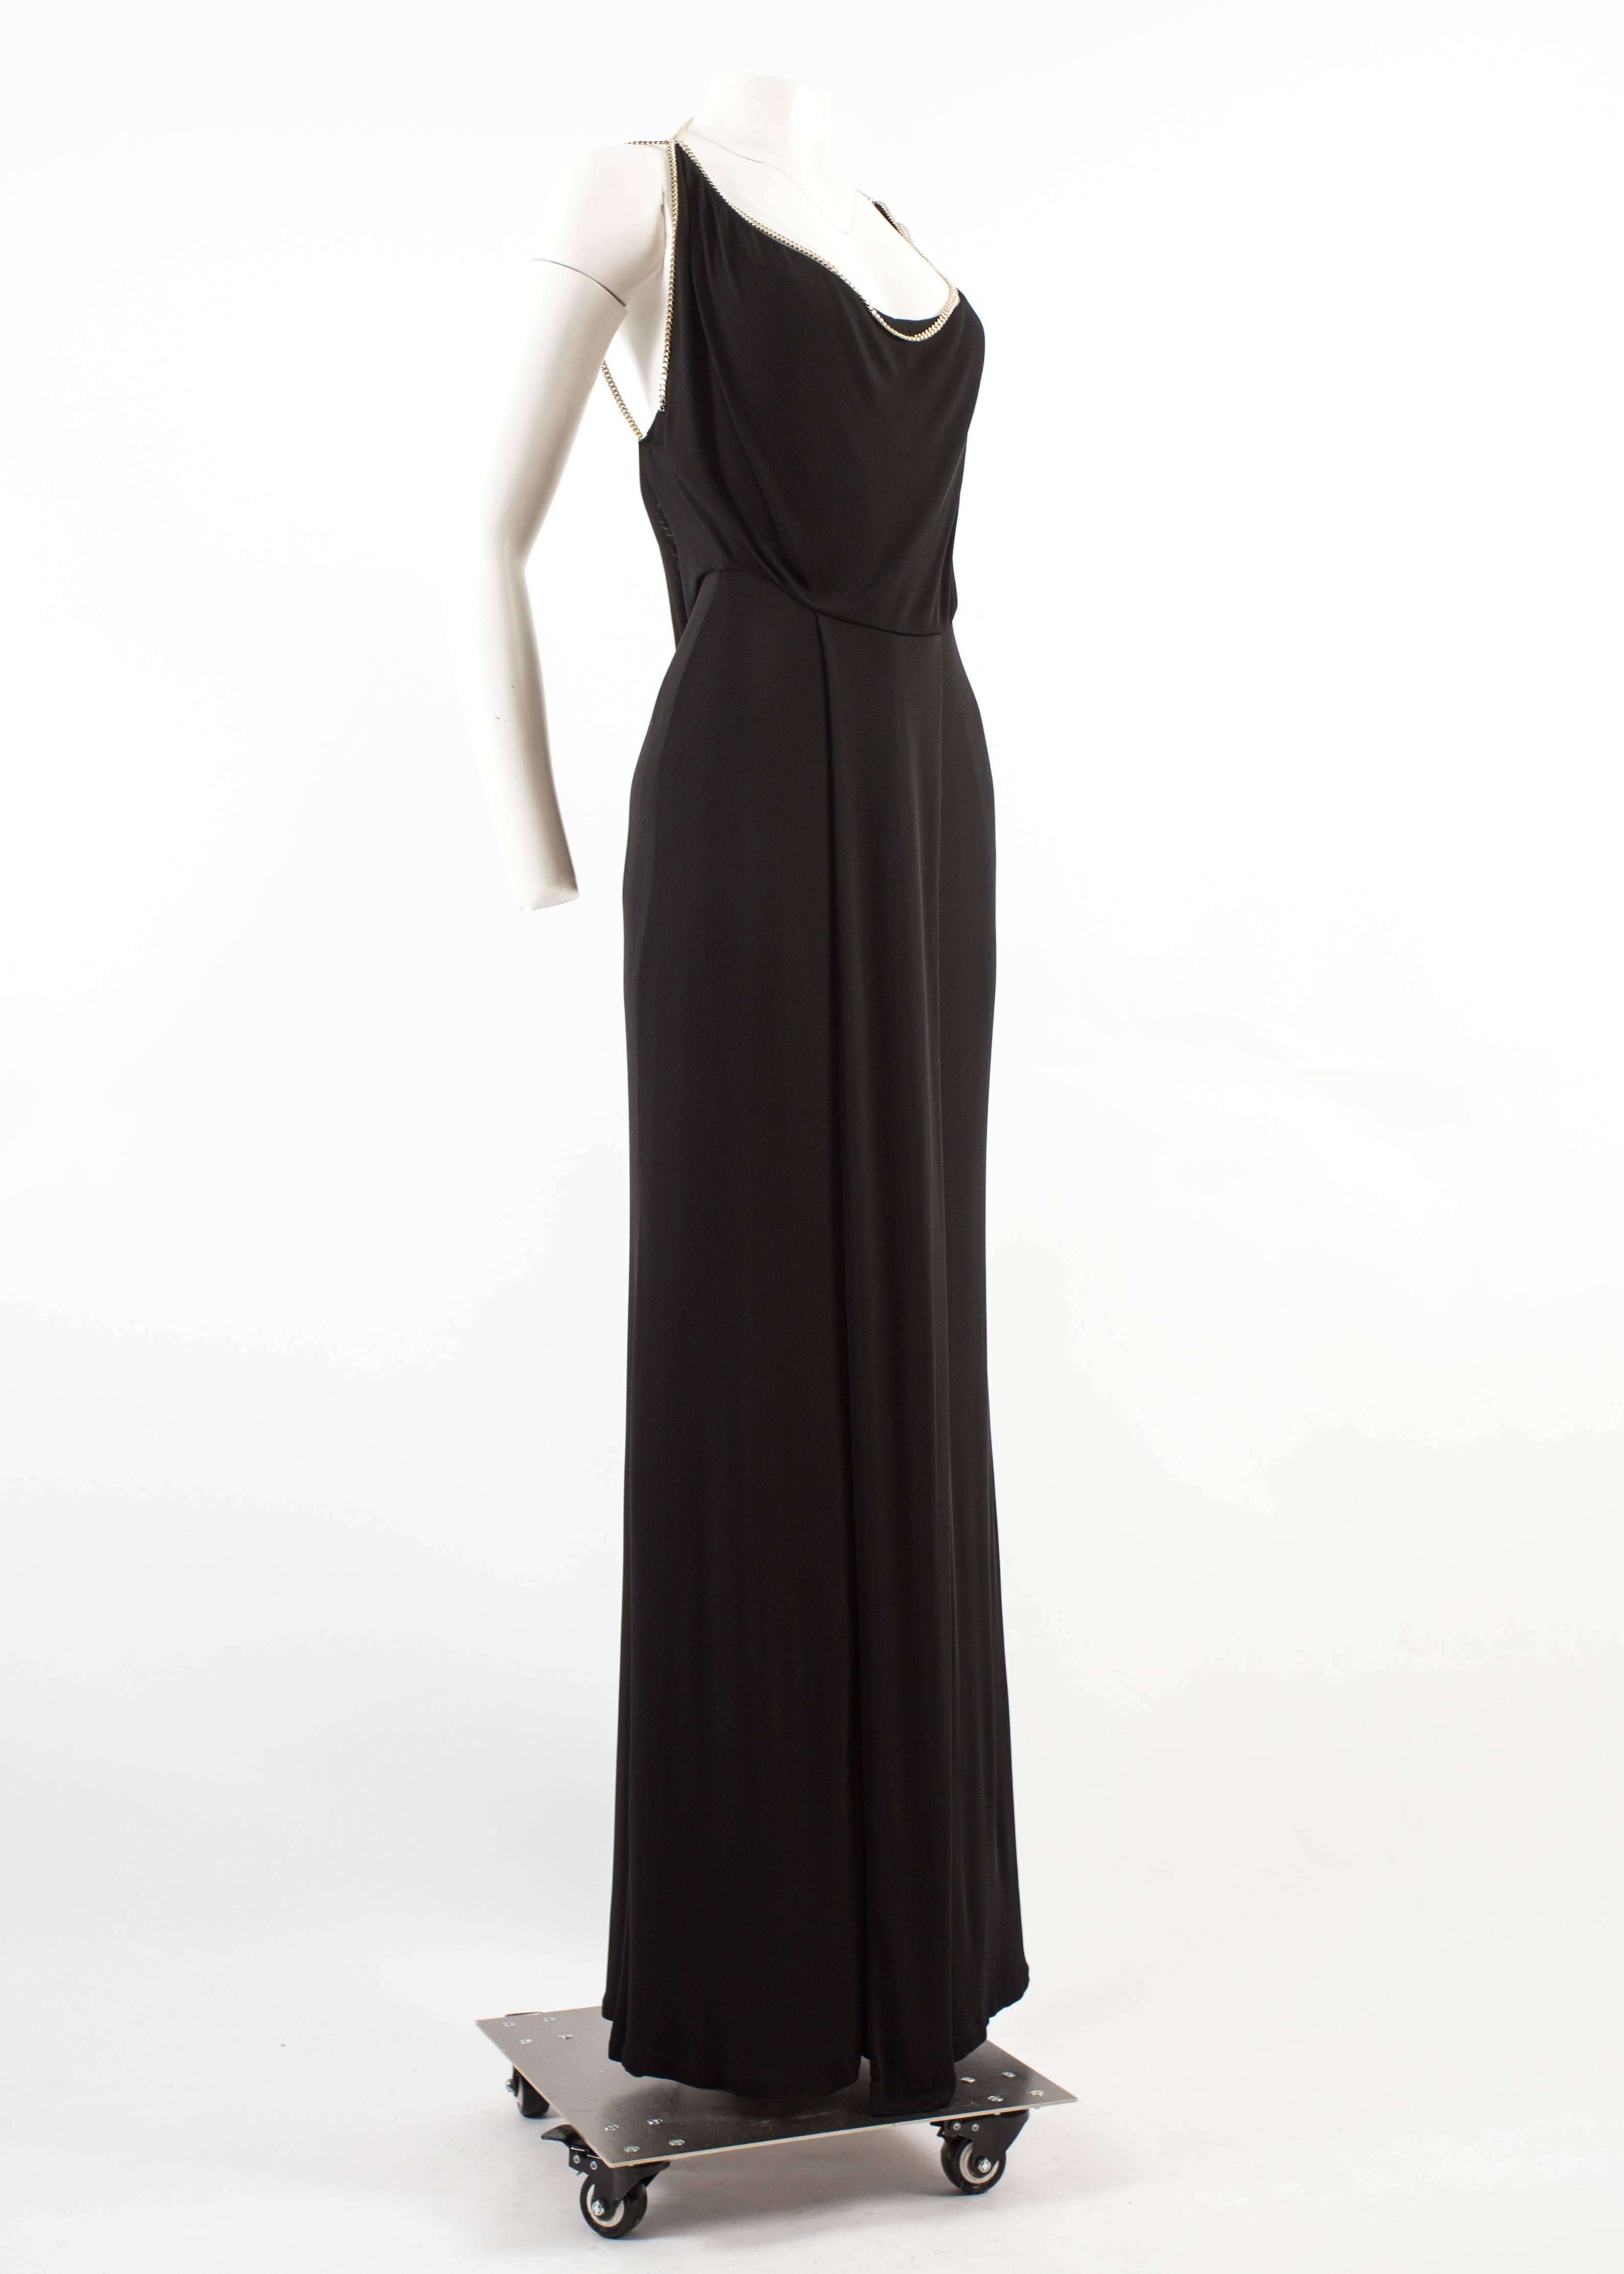 Women's Gucci Autumn-Winter 2006 backless black evening dress with metal chains